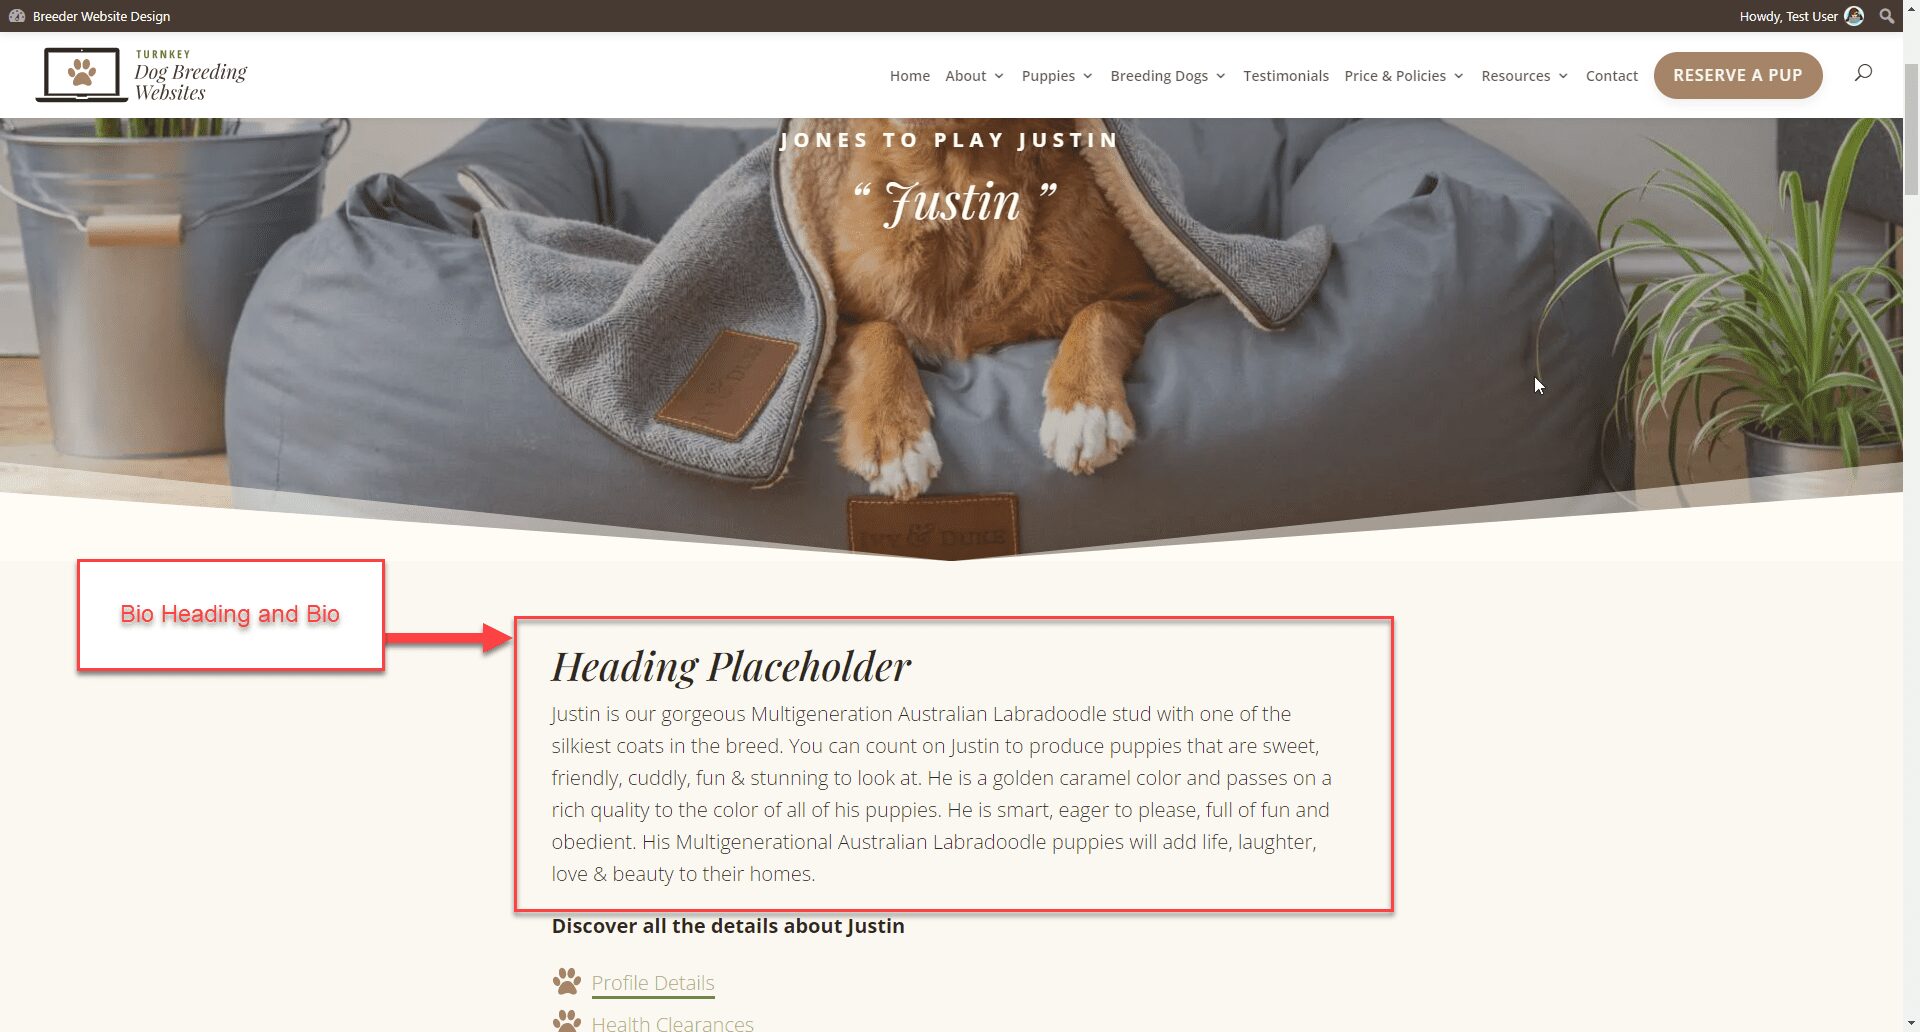 Dogs - Where the Dog Bio Heading and Bio Show on the Front of the Website - Screenshot